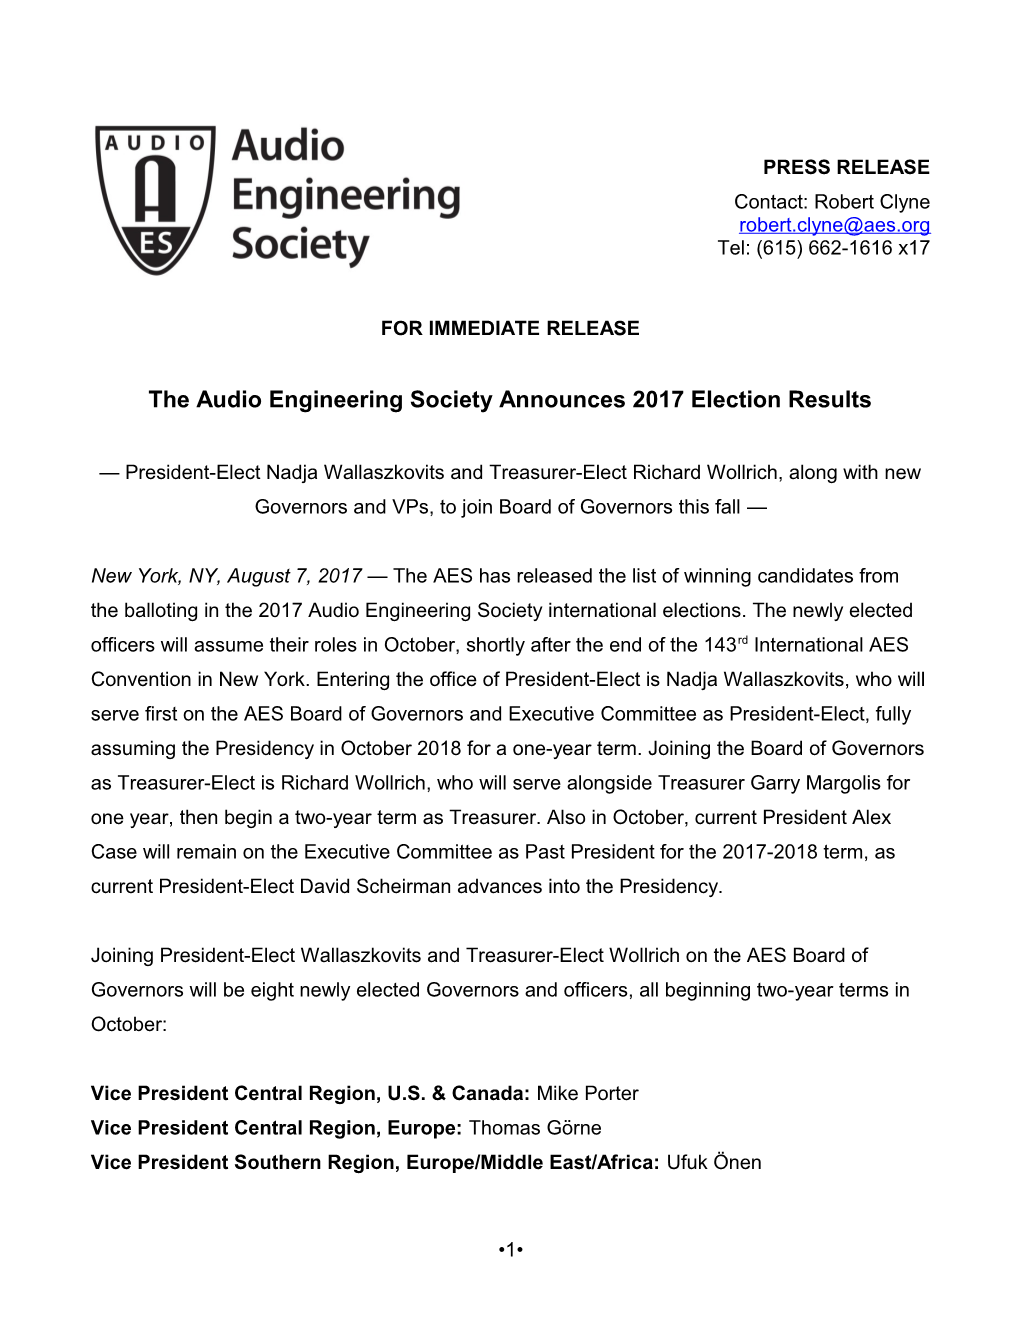 The Audio Engineering Society Announces 2017 Election Results